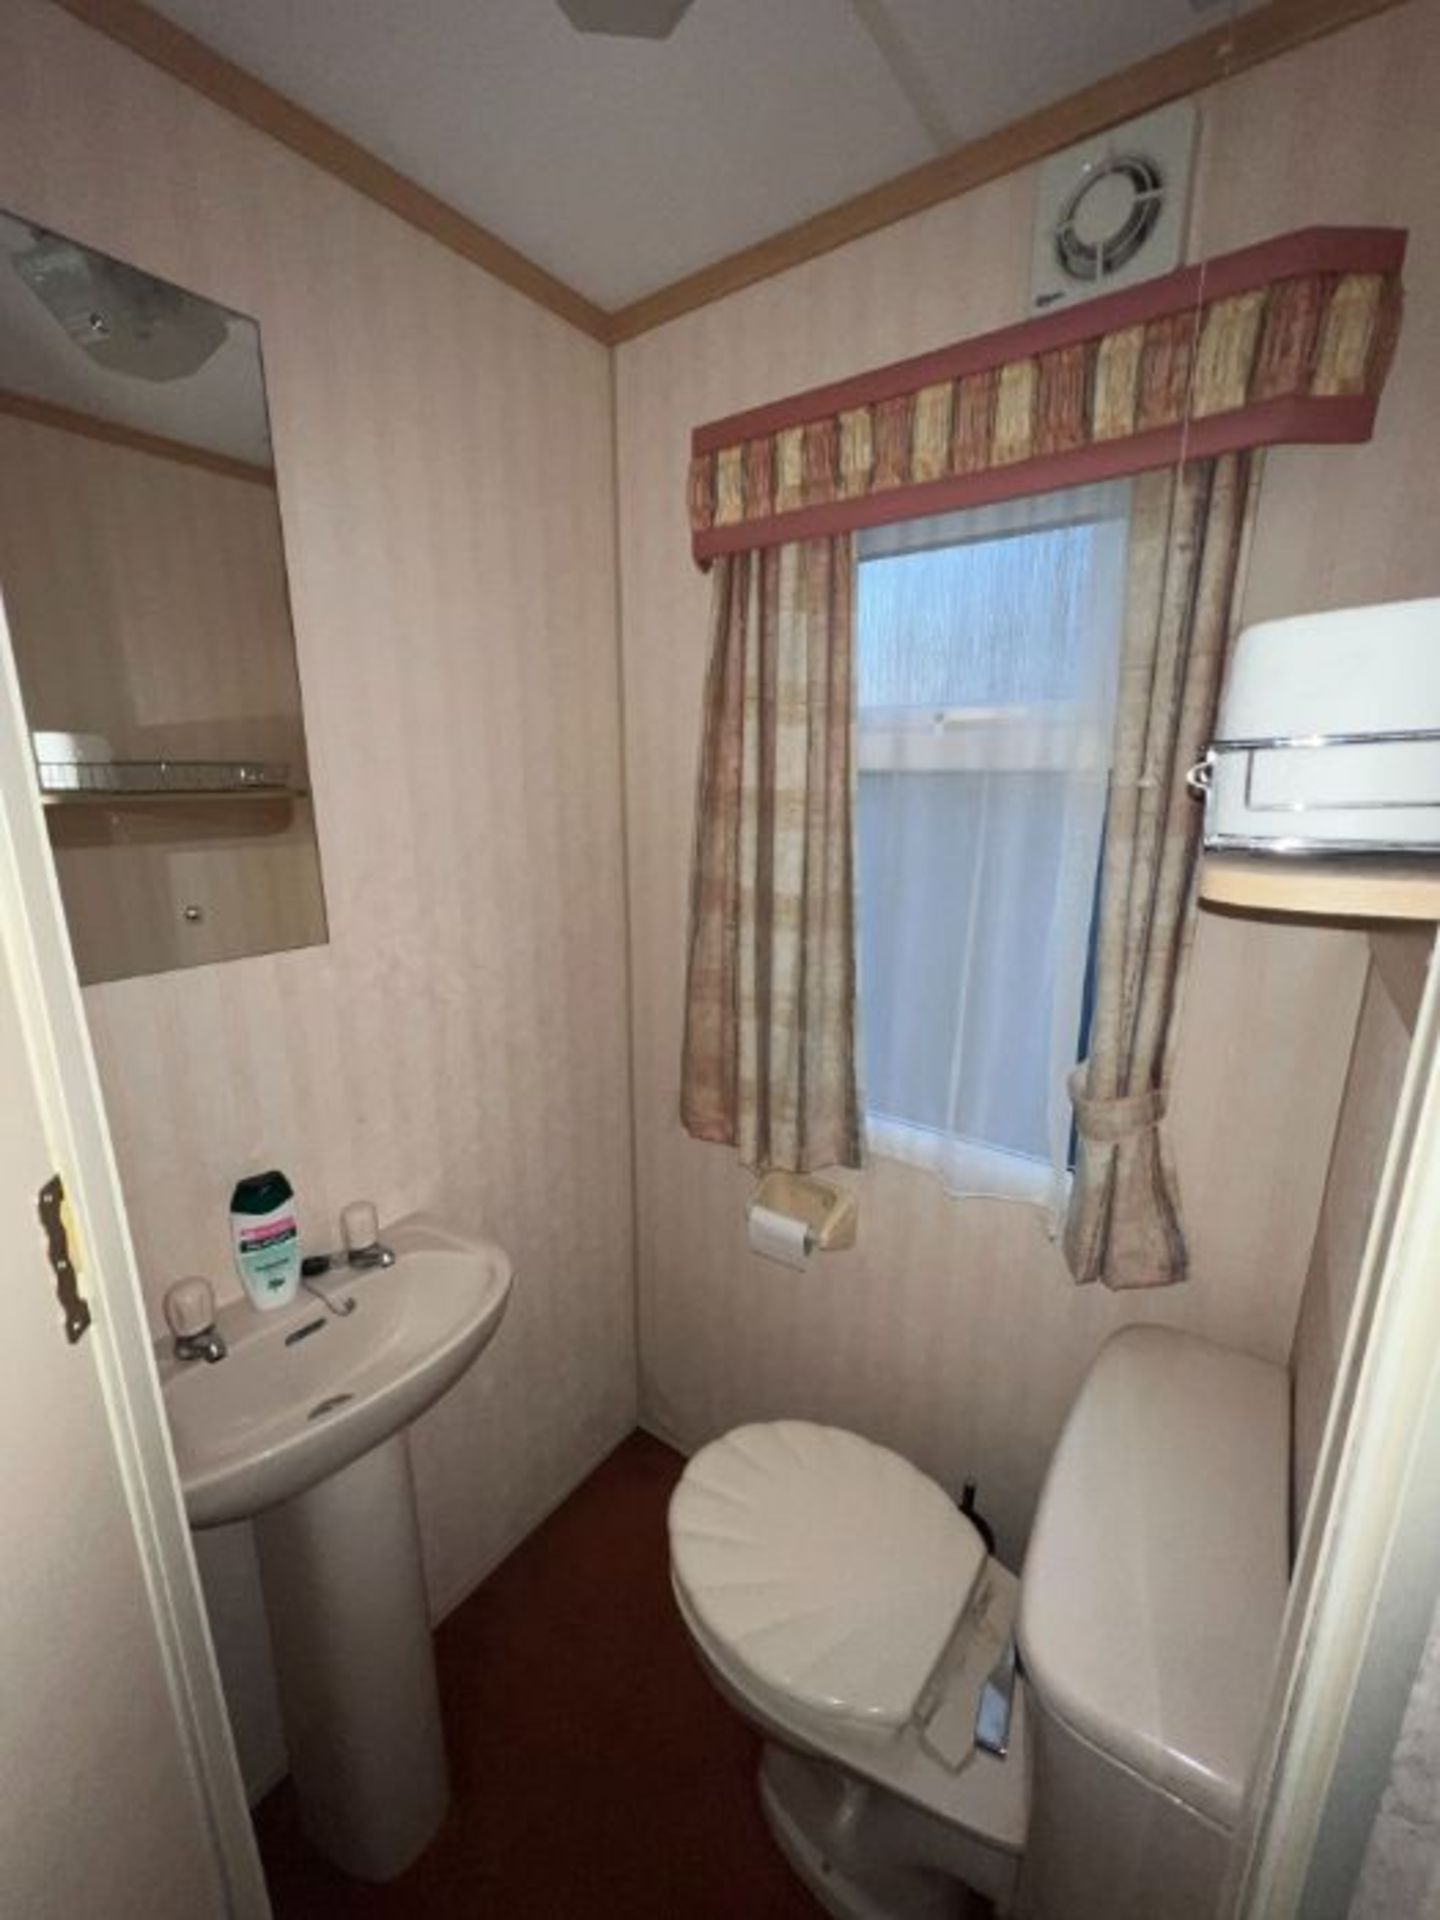 WILLERBY LYNDHURST 37FT X 12FT, 2 BEDROOM STATIC CARAVAN DOUBLE GLAZED & CENTRAL HEATING - LOCATED - Image 7 of 50